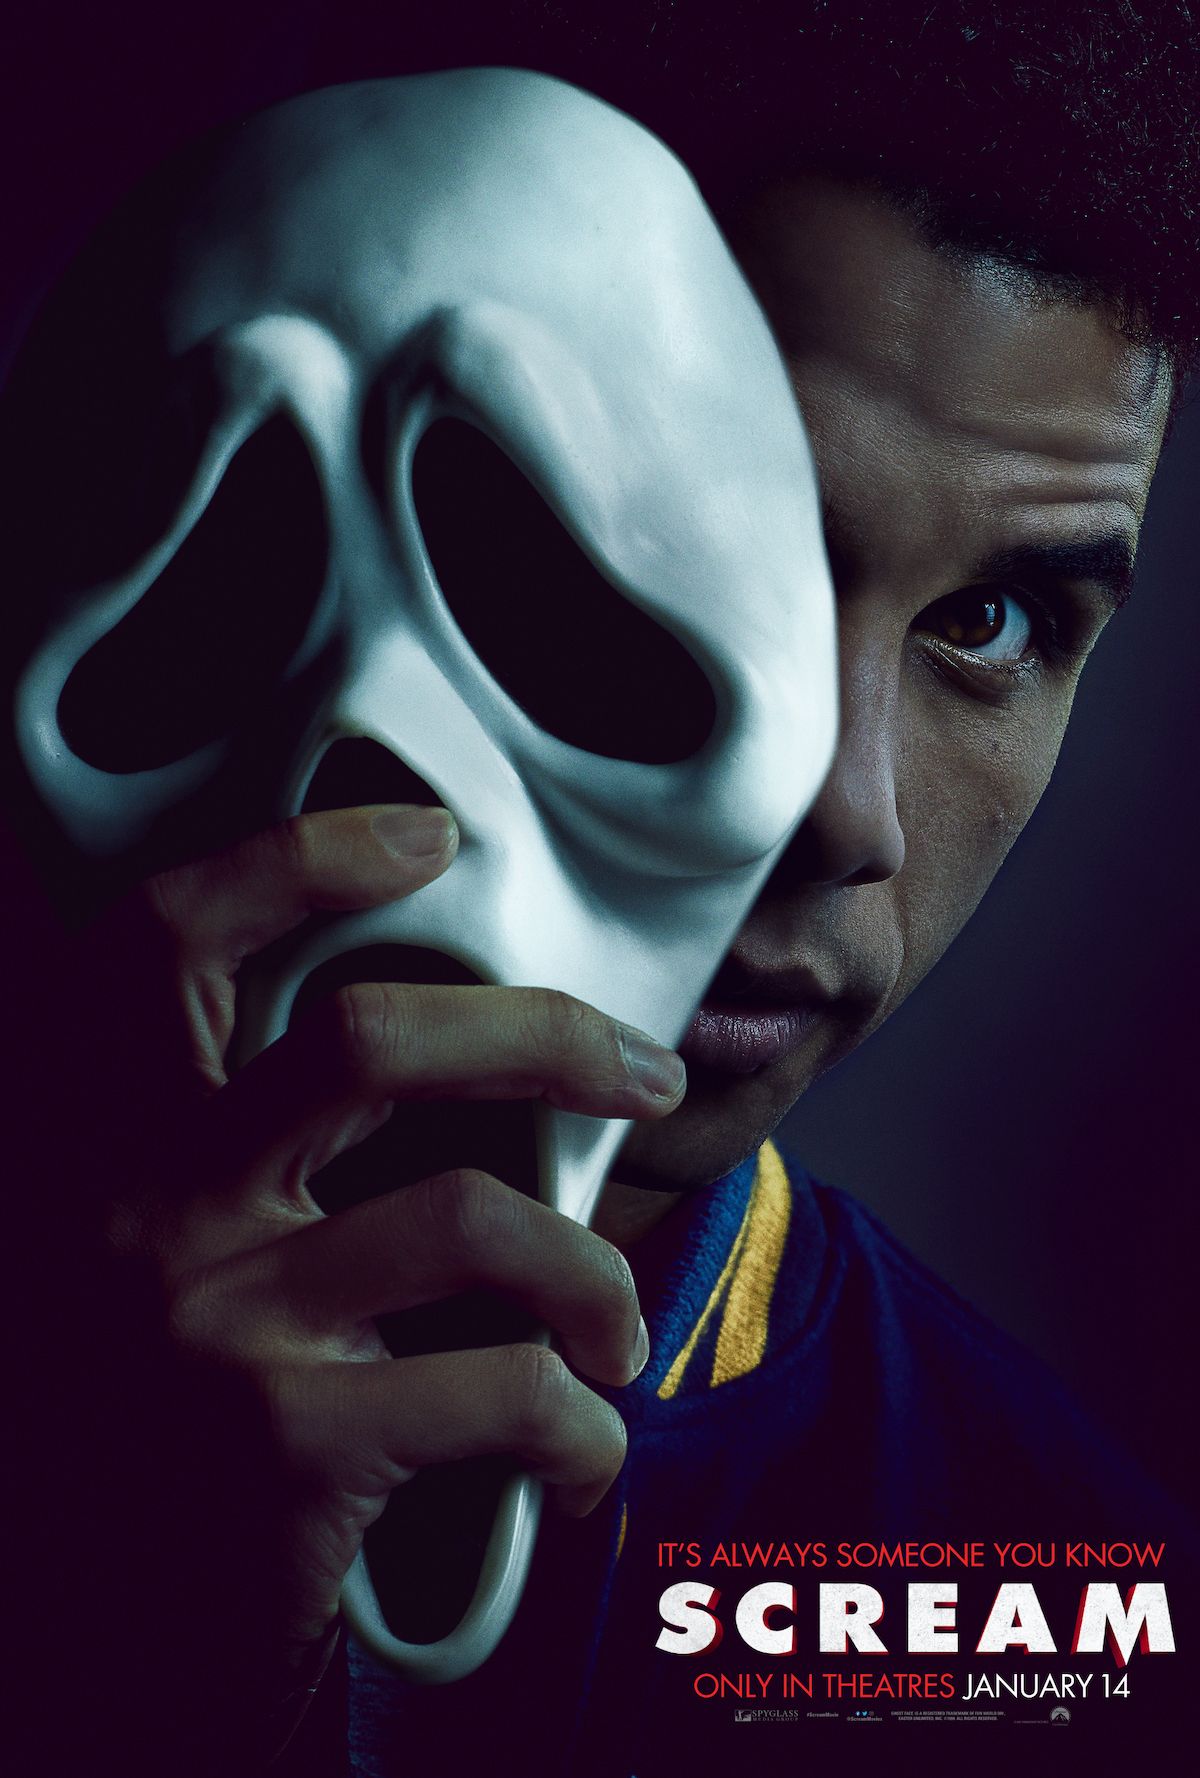 SCREAM Video and 9 New Posters Ask Who’s Hiding Behind Ghostface’s Mask